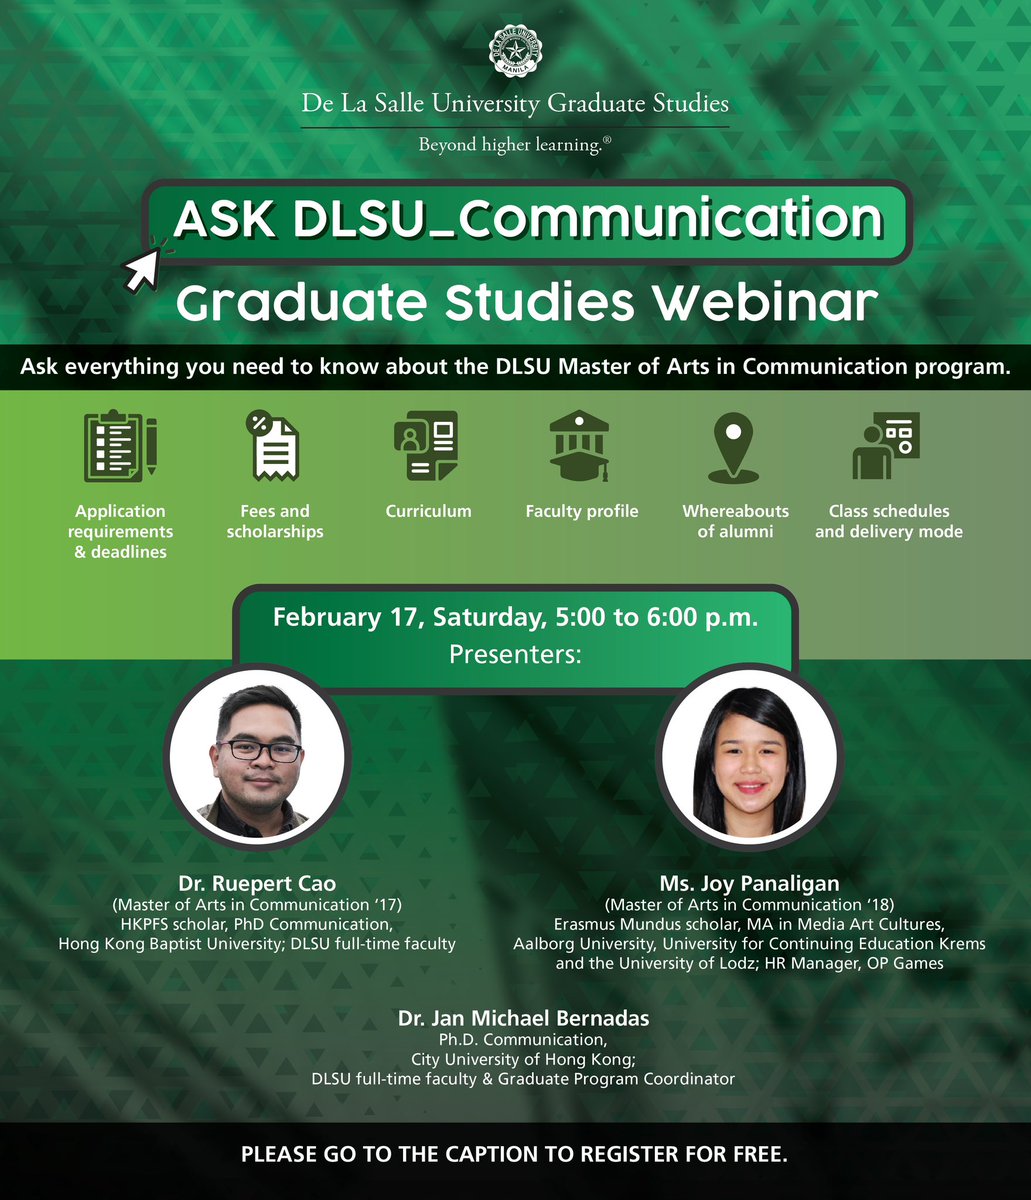 Ask everything you need to know about the DLSU Master of Arts in Communication program. Join the Ask DLSU_Communication info session on Feb. 17, Saturday, 5 p.m. to 6 p.m. via Zoom.  Register for free here: zoom.us/meeting/regist…